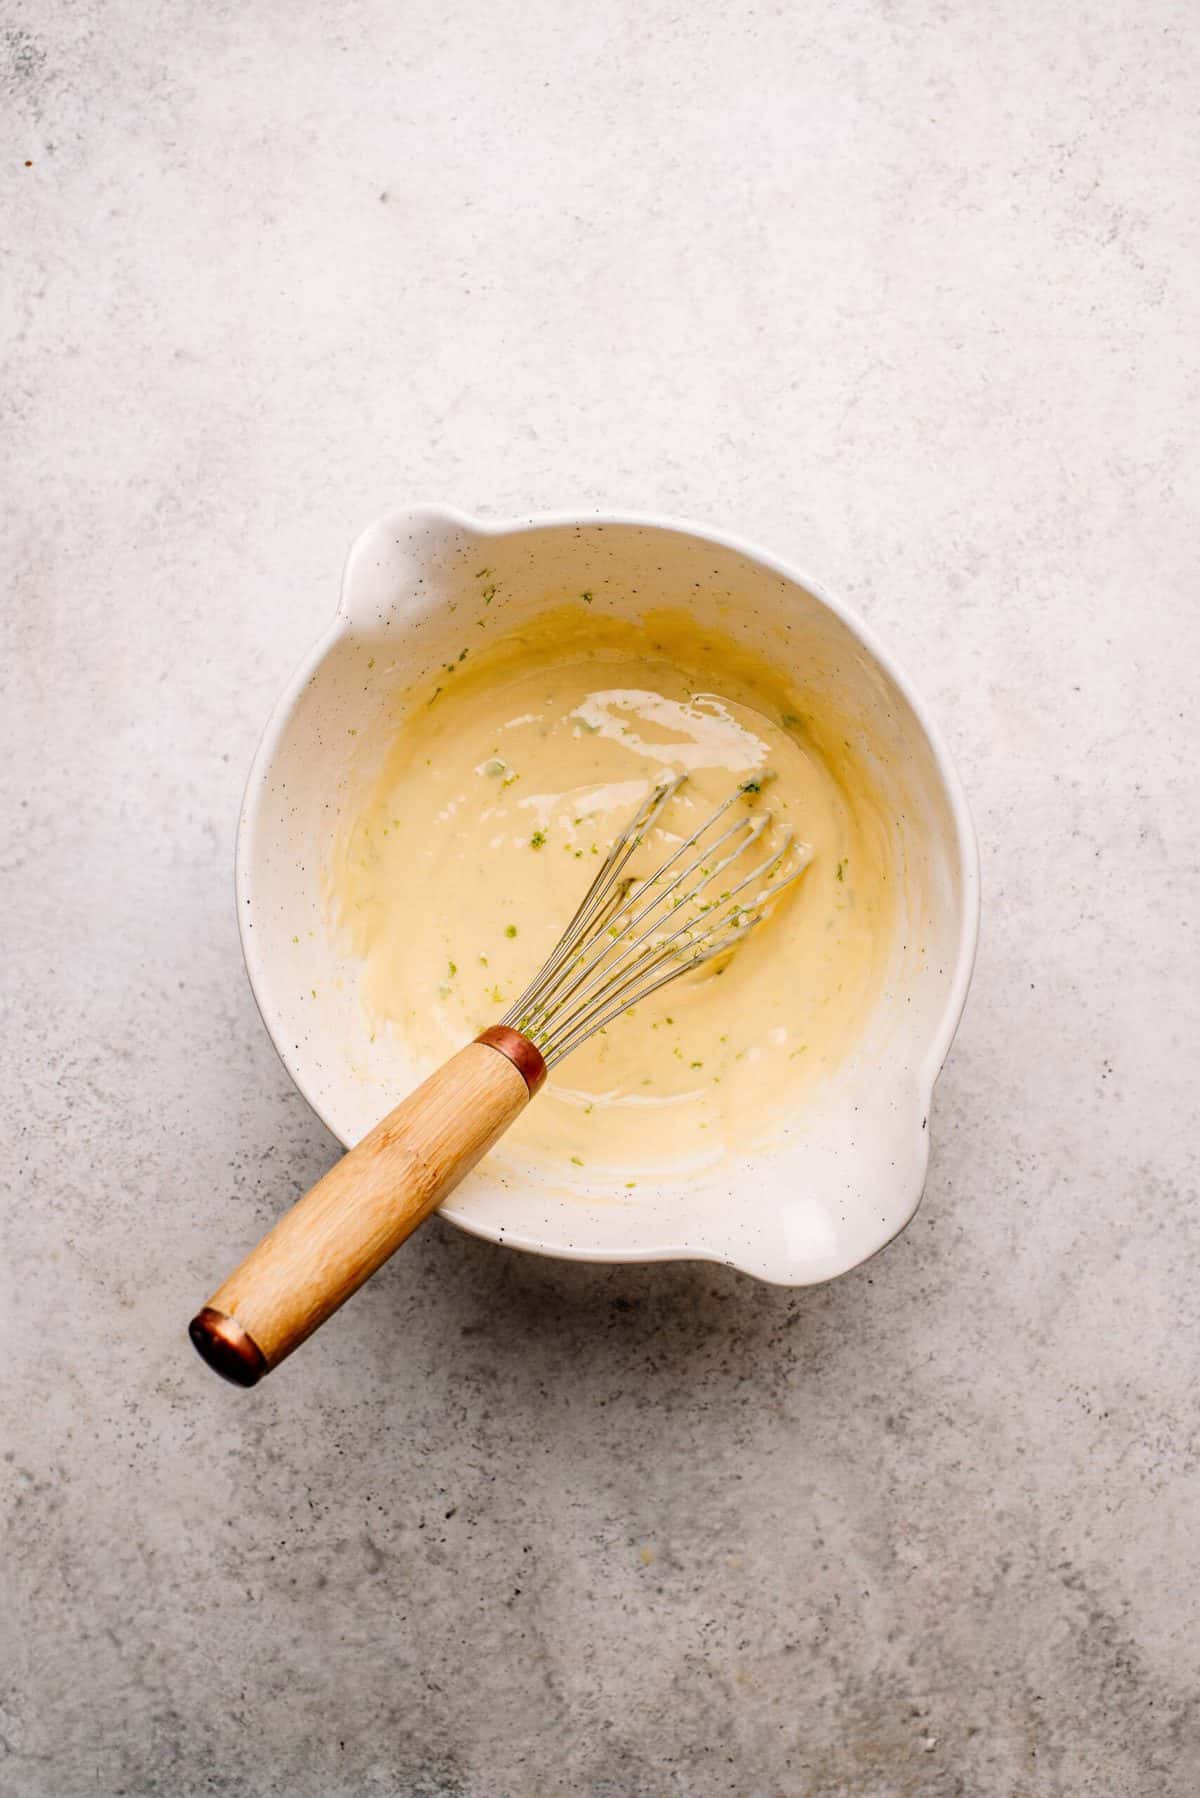 Key lime pie batter in a white mixing bowl.